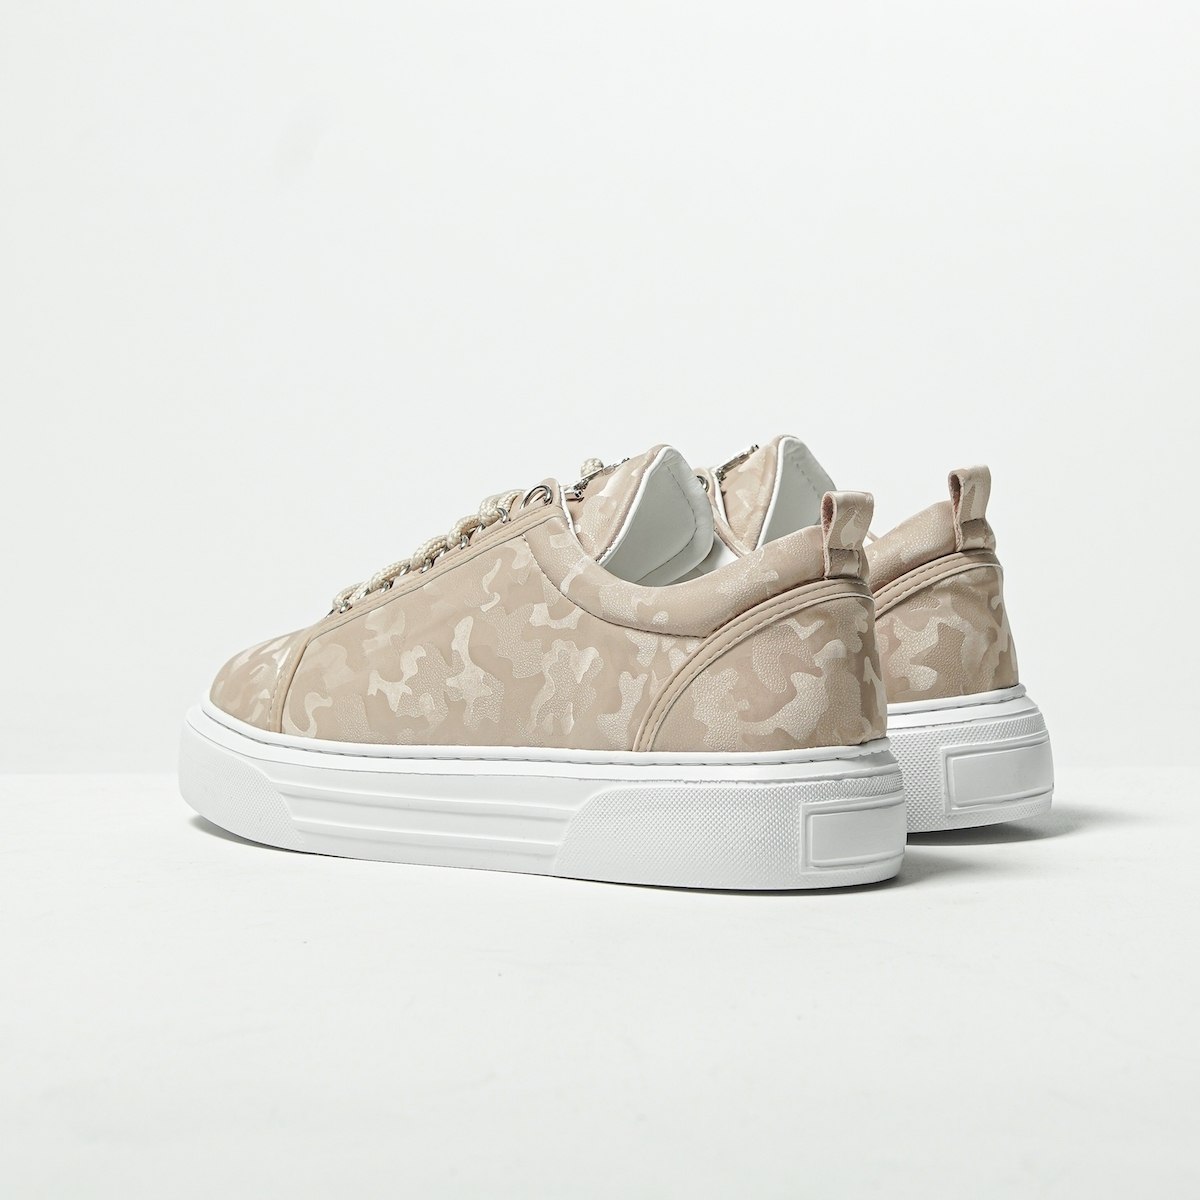 Baskets Basses pour Homme Sneakers Couronnées Camouflage Taupe | Martin Valen